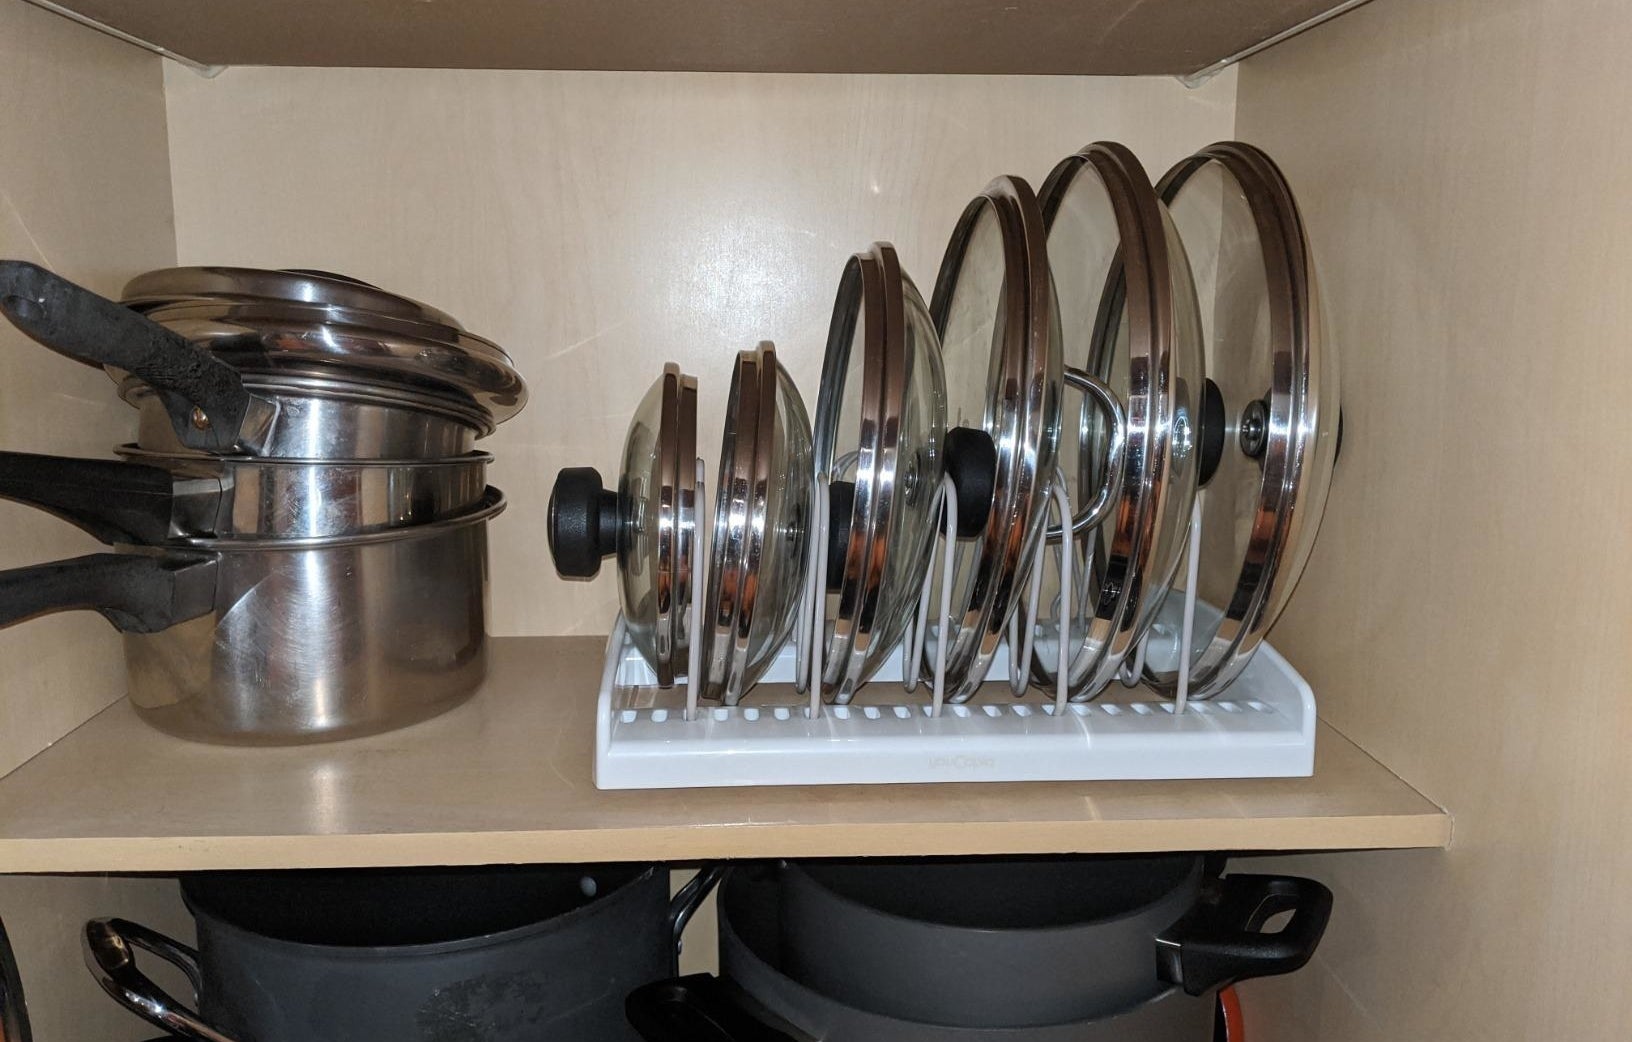 reviewer photo showing lids to pots and pans neatly organized in the bakeware rack